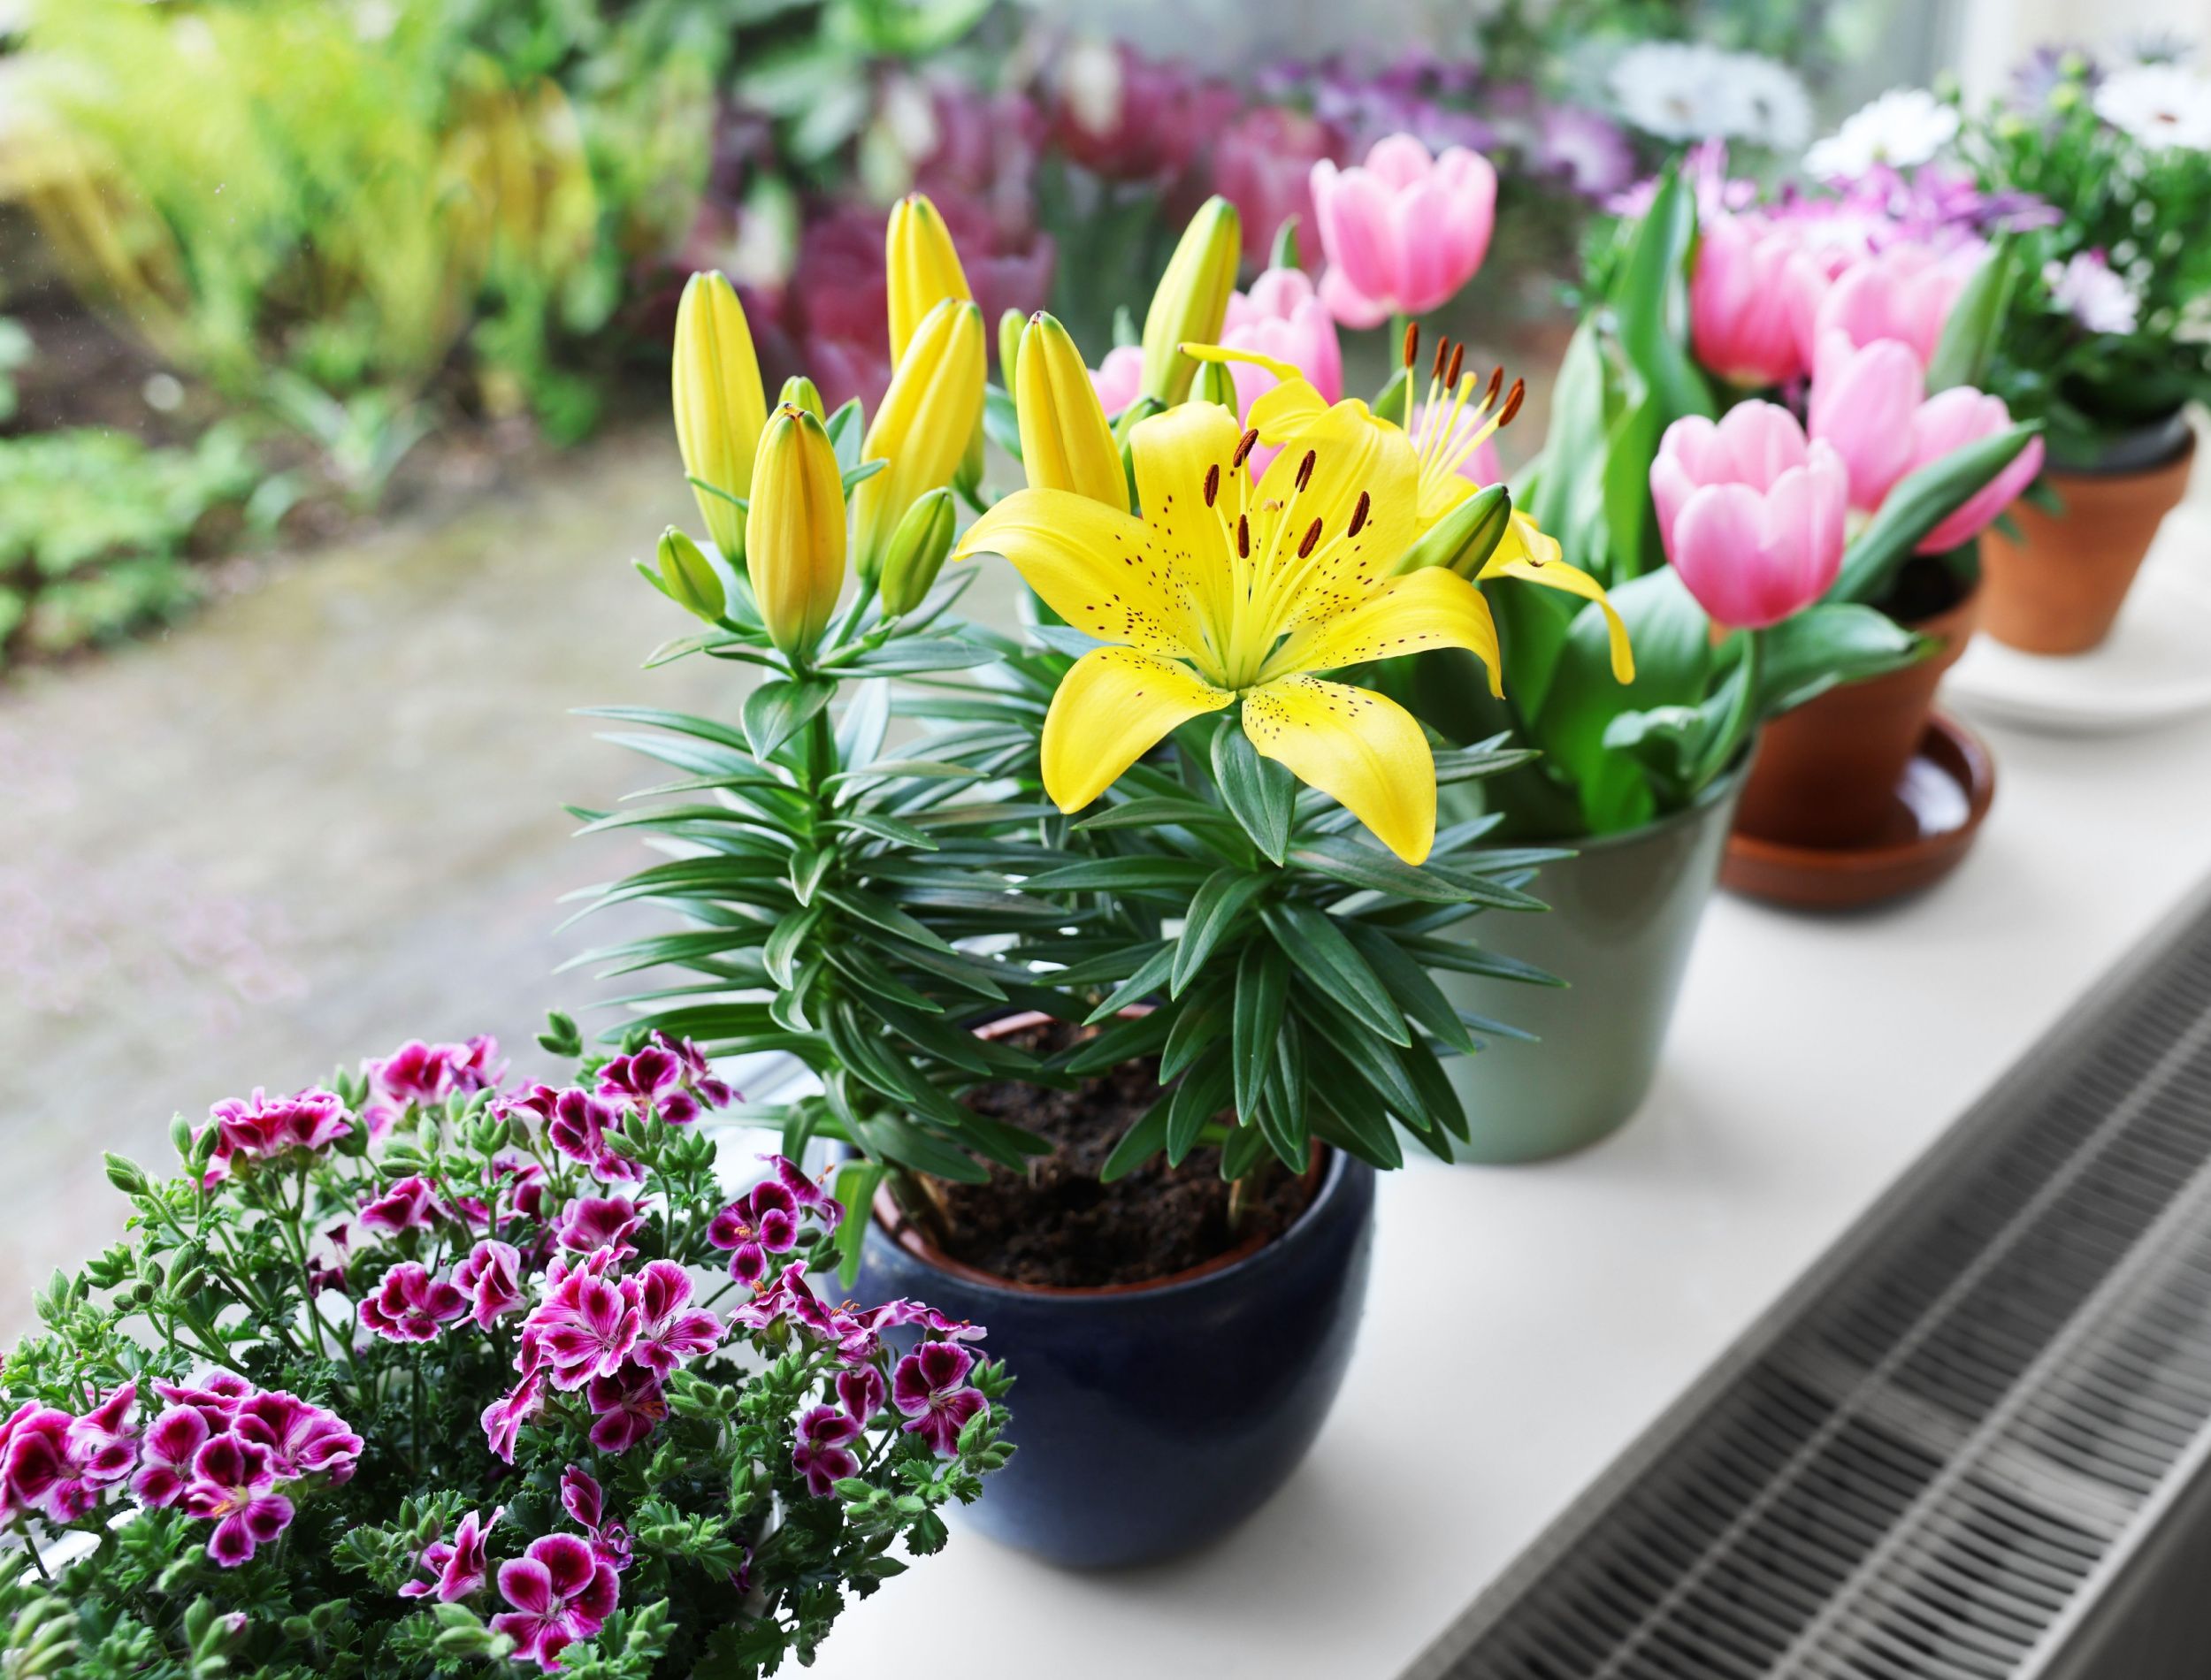 How To Grow Lilies in Pots